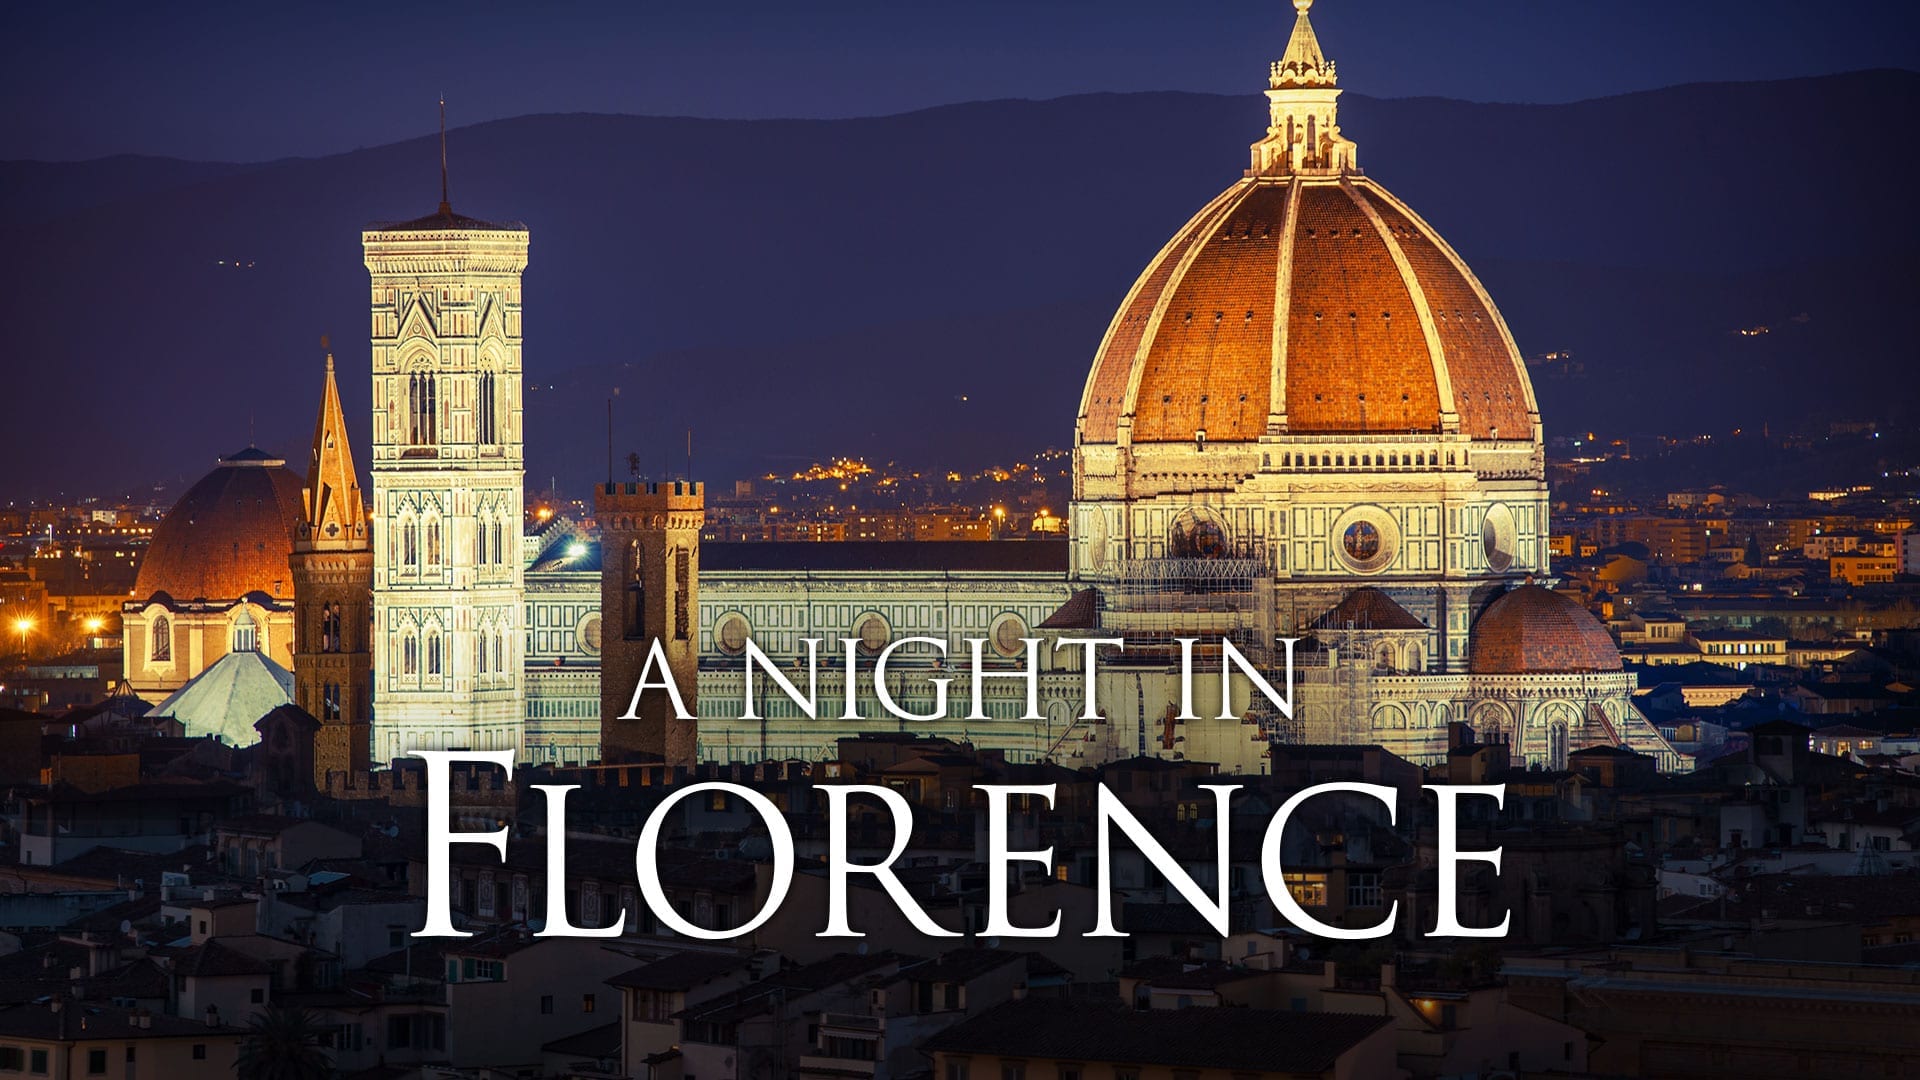 a night in florence vimeo ott series banner 1920x1080 A M